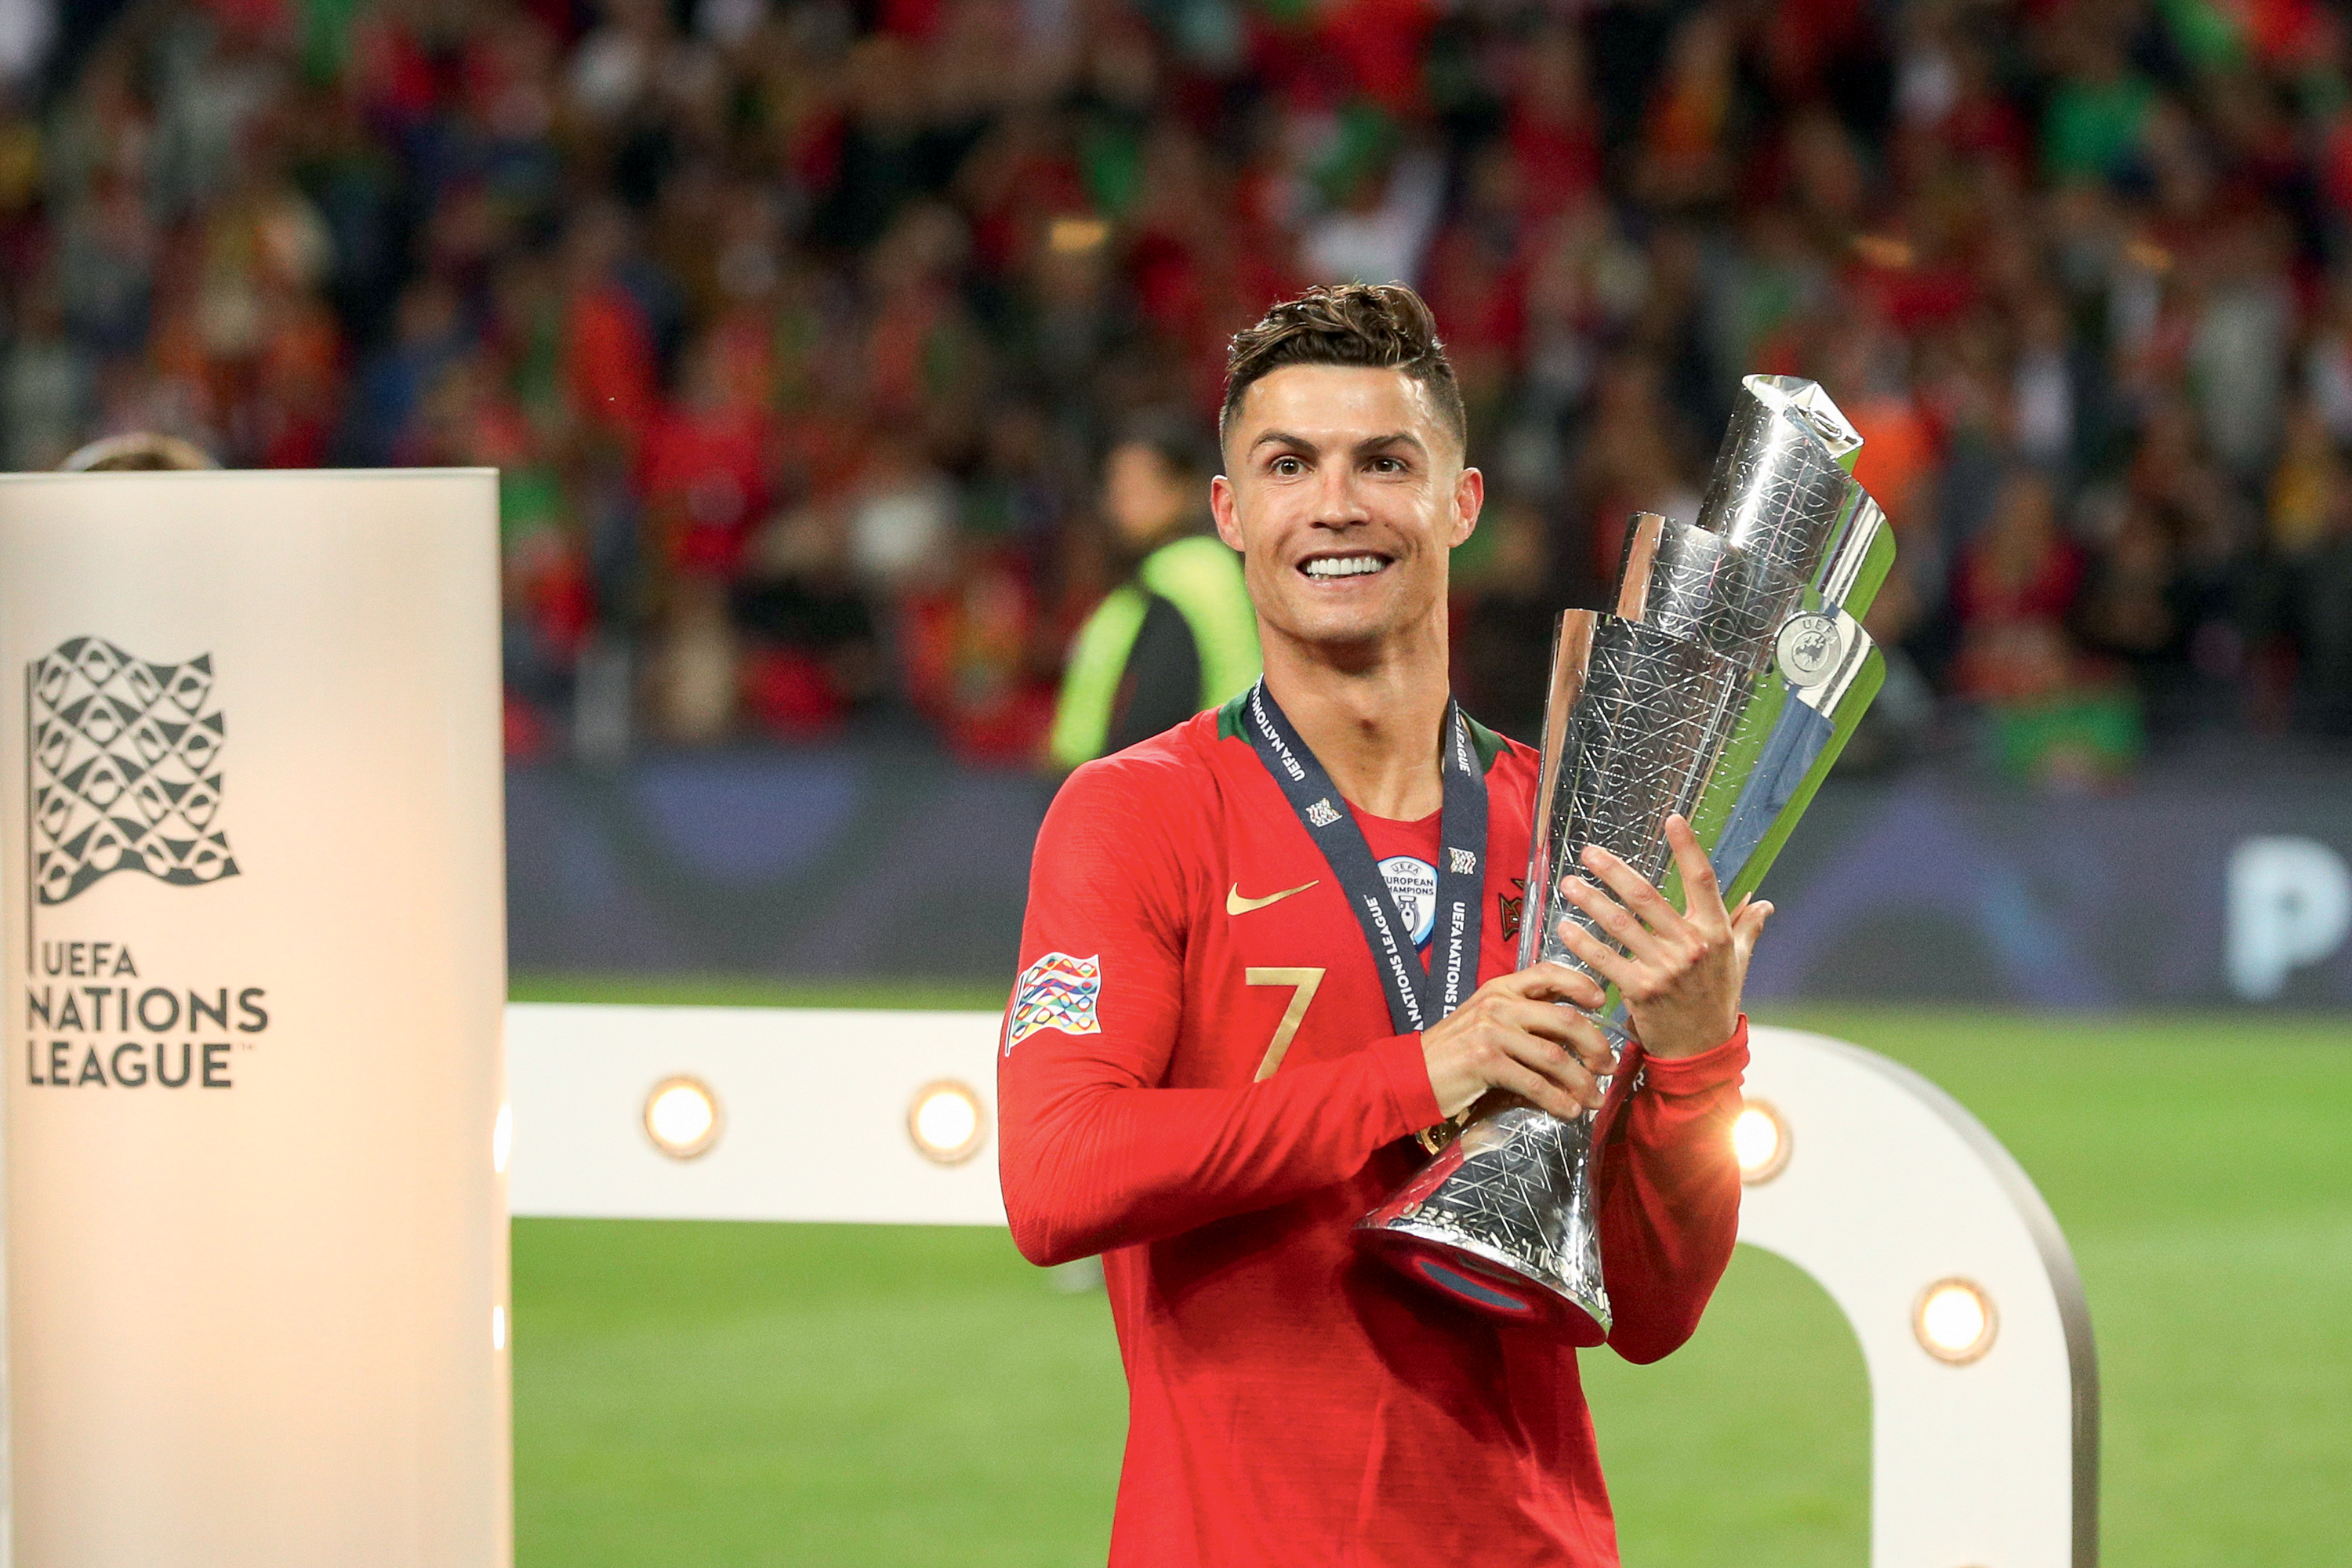 Cristiano Ronaldo forward of Portugal celebrates the victory of the trophy, UEFA Nations League Final match between Portugal and Netherlands at the Dragao stadium in Porto on June 9, 2019. (Photo by Paulo Oliveira / DPI / NurPhoto via Getty Images)